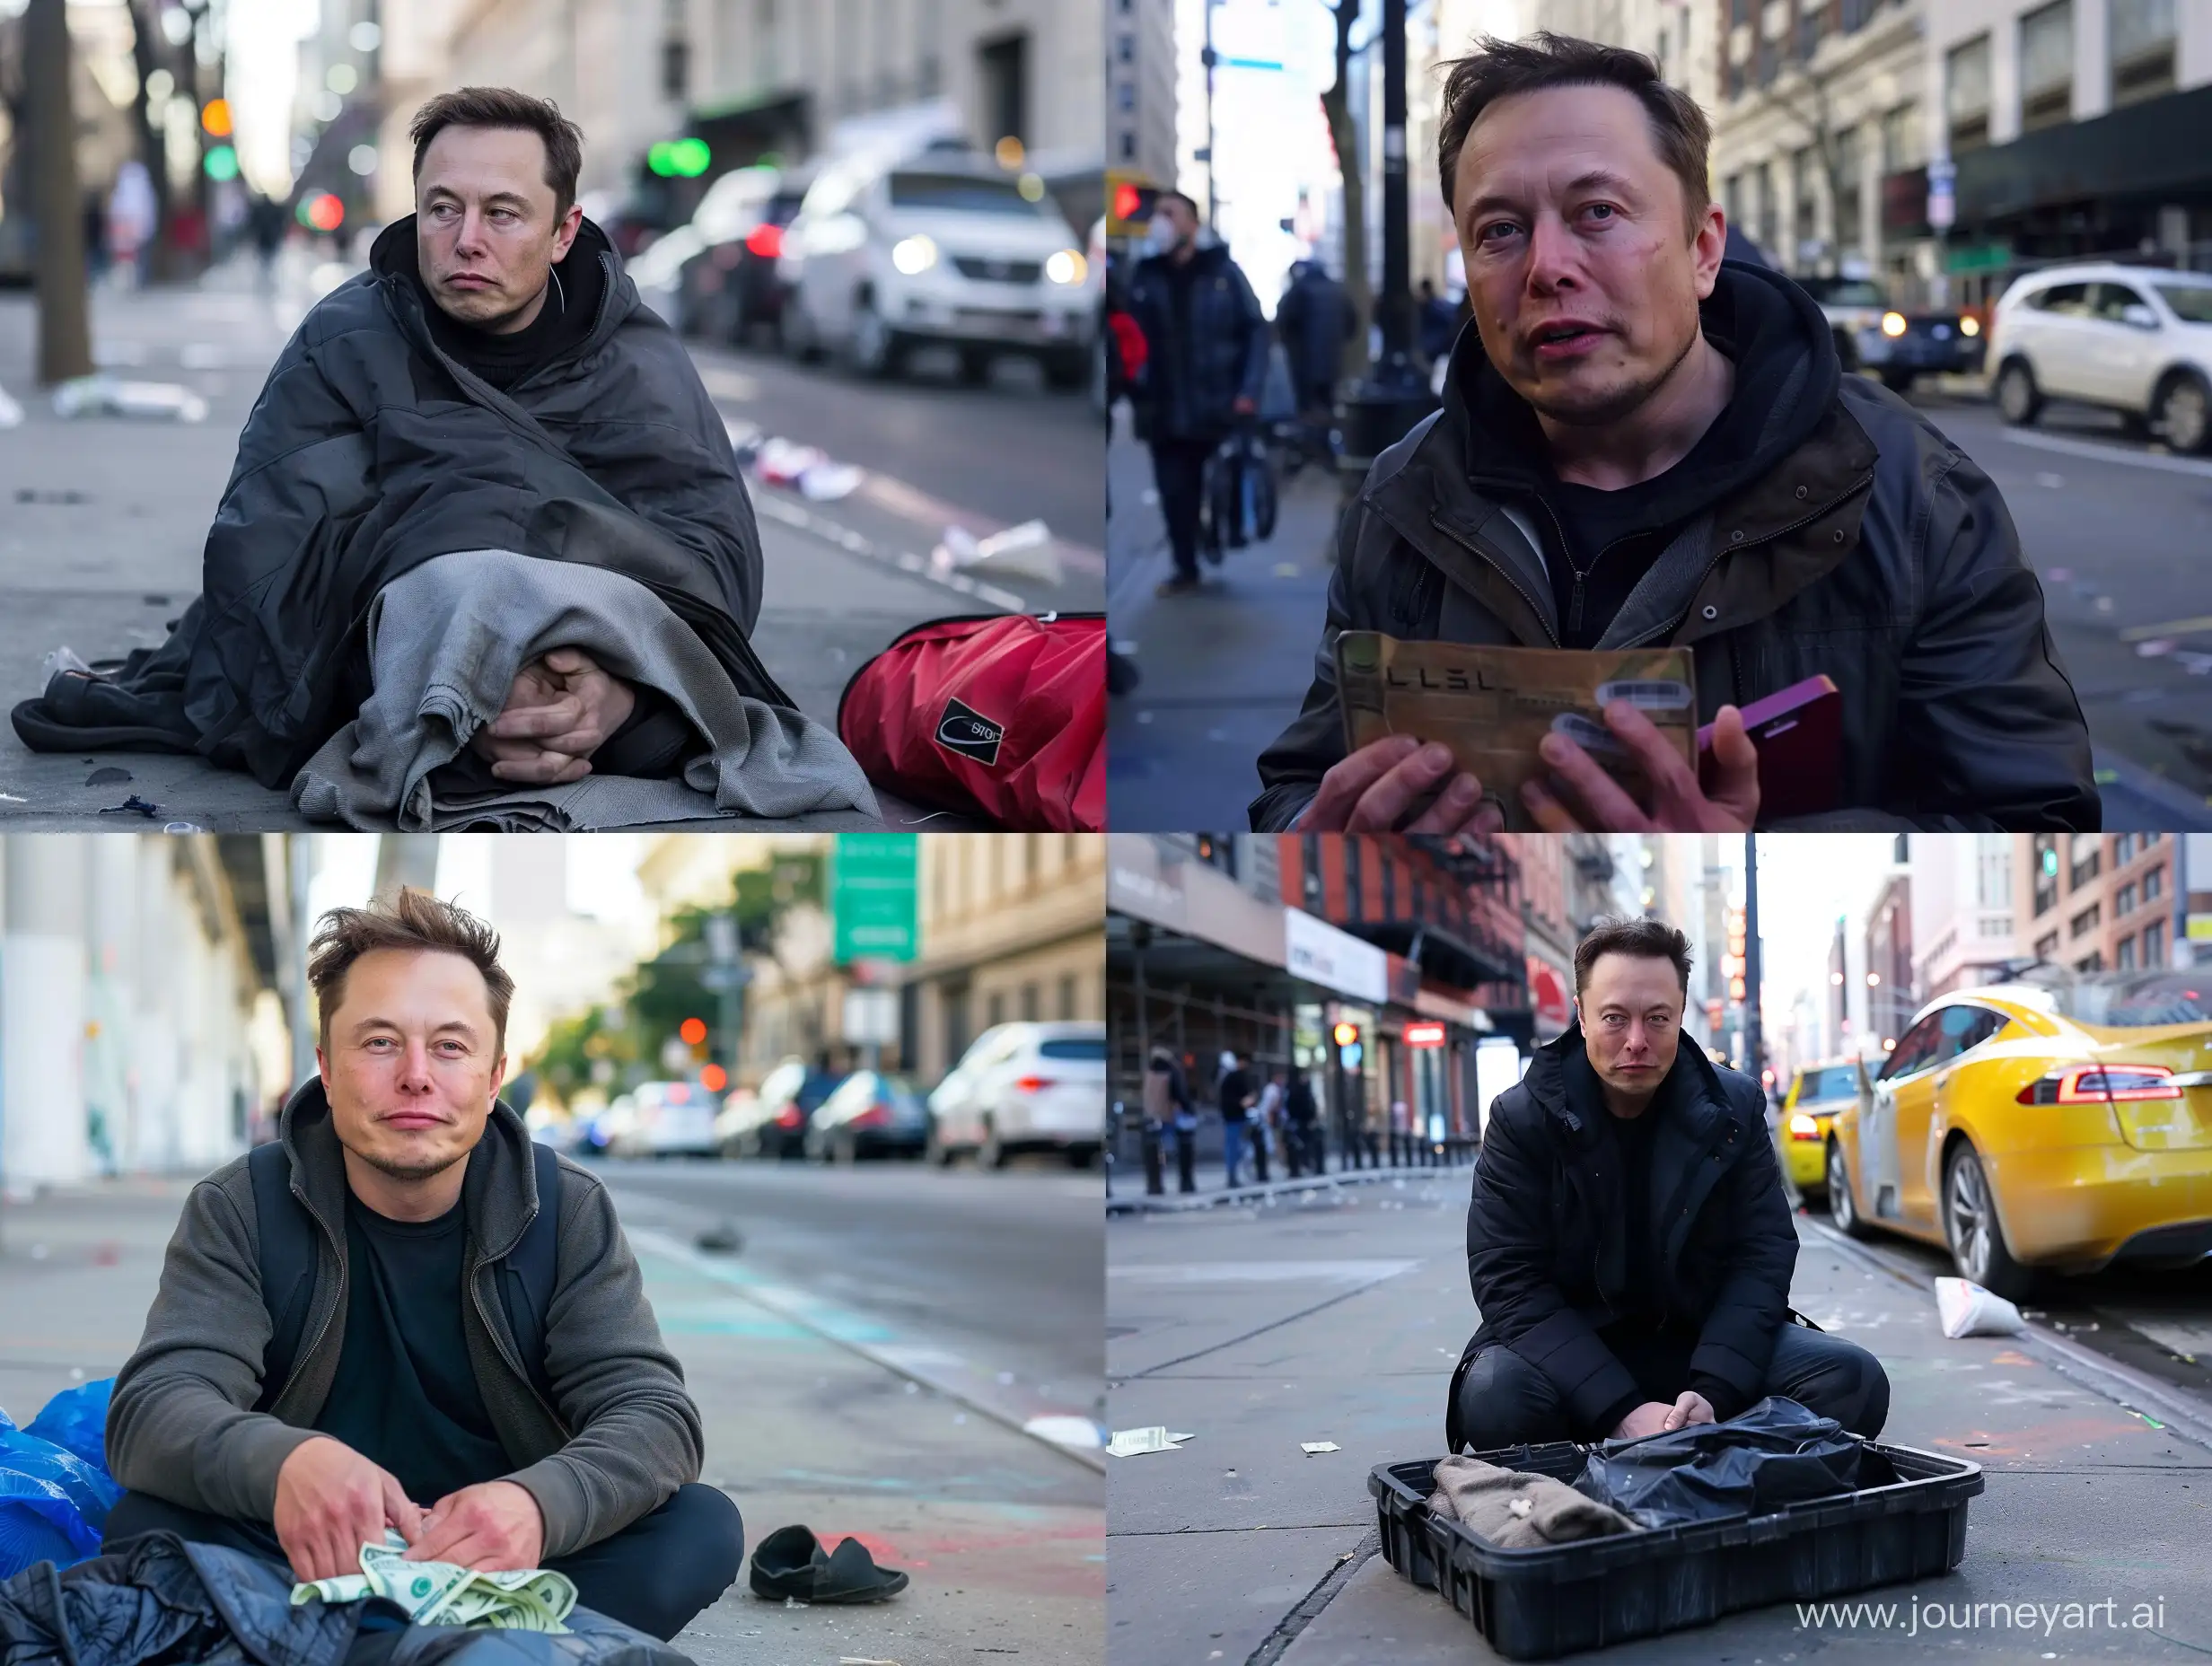 Elon-Musk-in-Streets-Seeking-Support-Empathy-and-Struggle